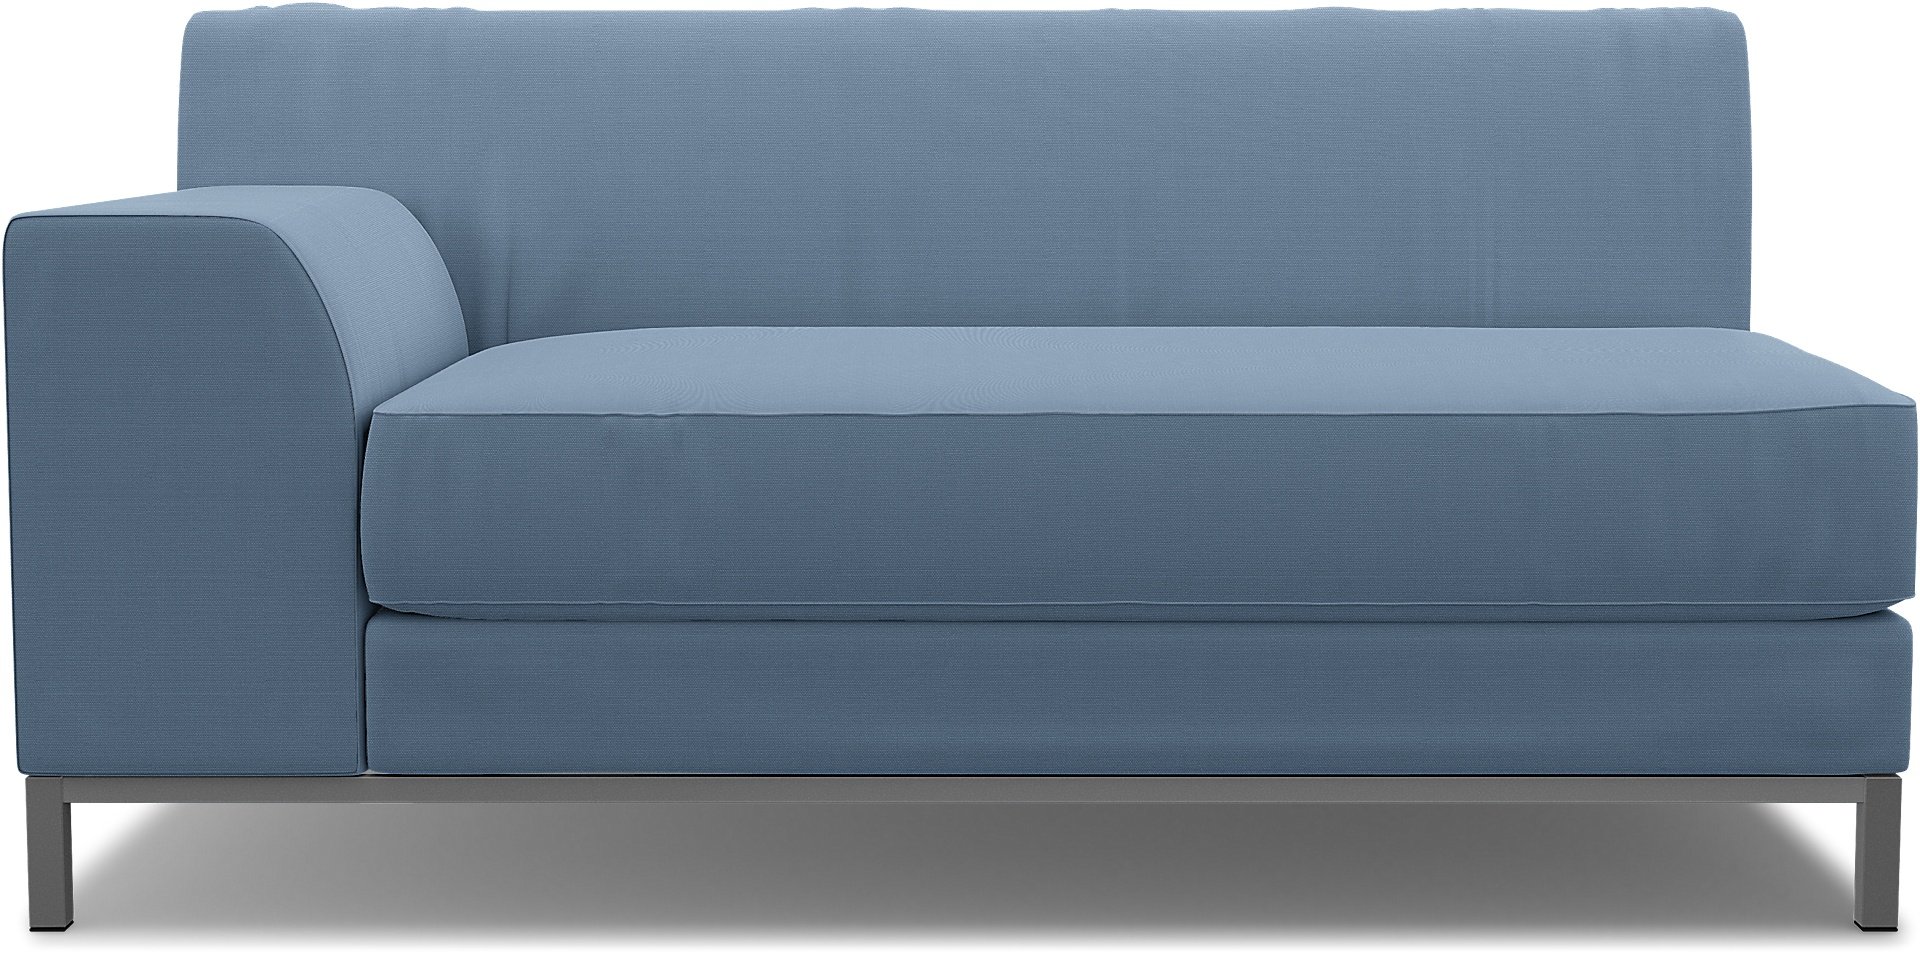 IKEA - Kramfors 2 Seater Sofa with Left Arm Cover, Dusty Blue, Cotton - Bemz